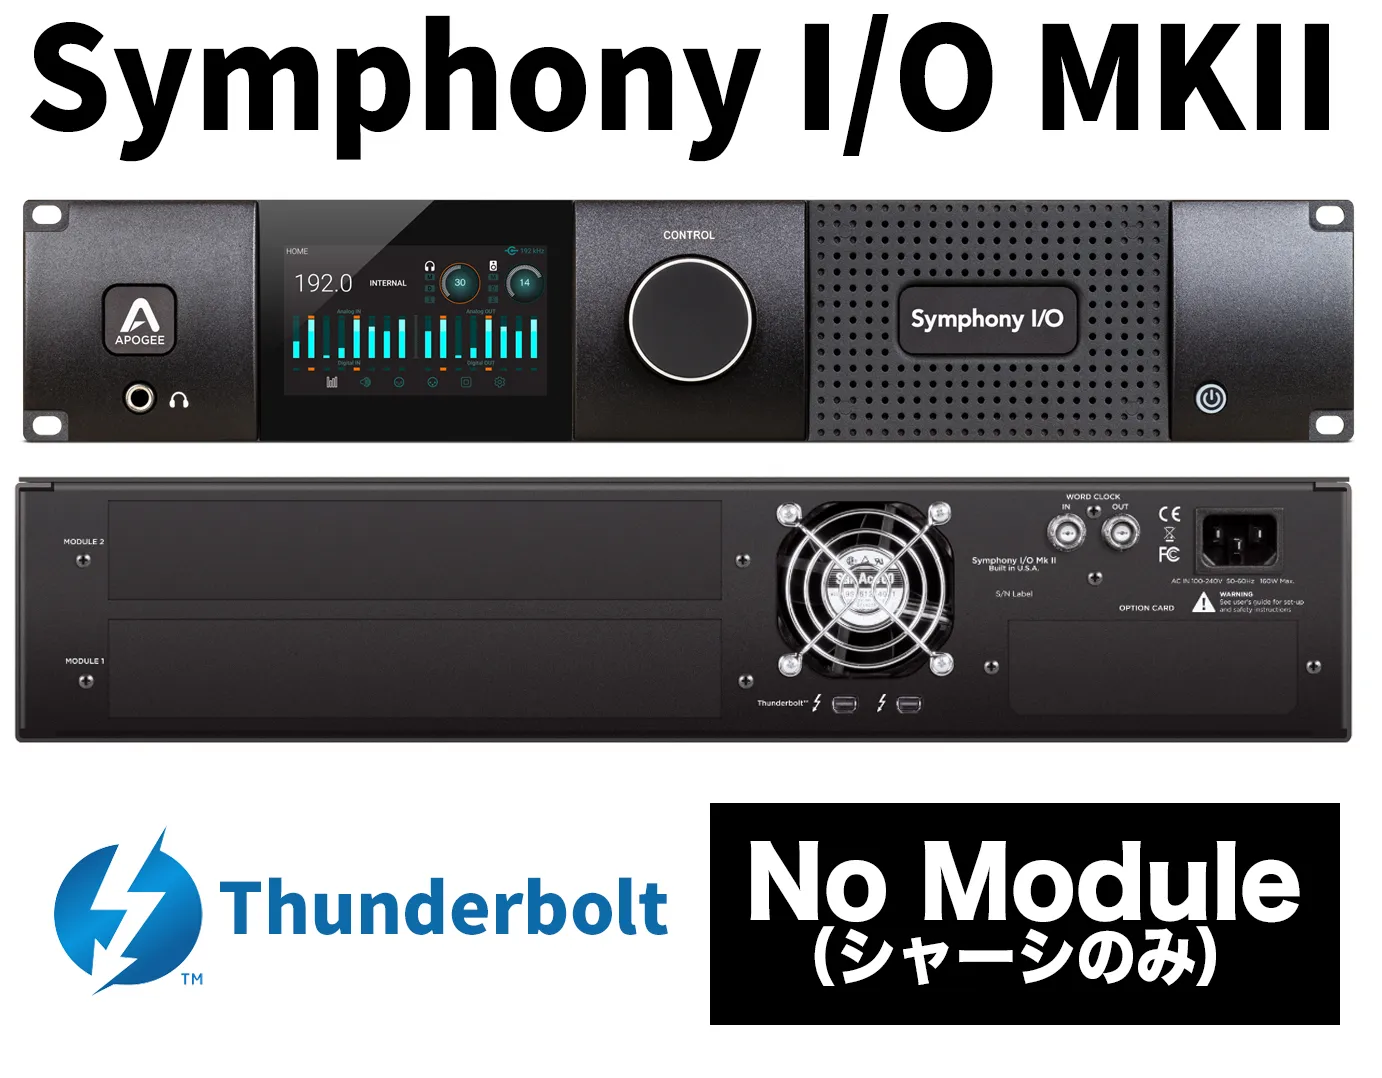 Symphony I/O MKII Thunderbolt Chassis -No module included　